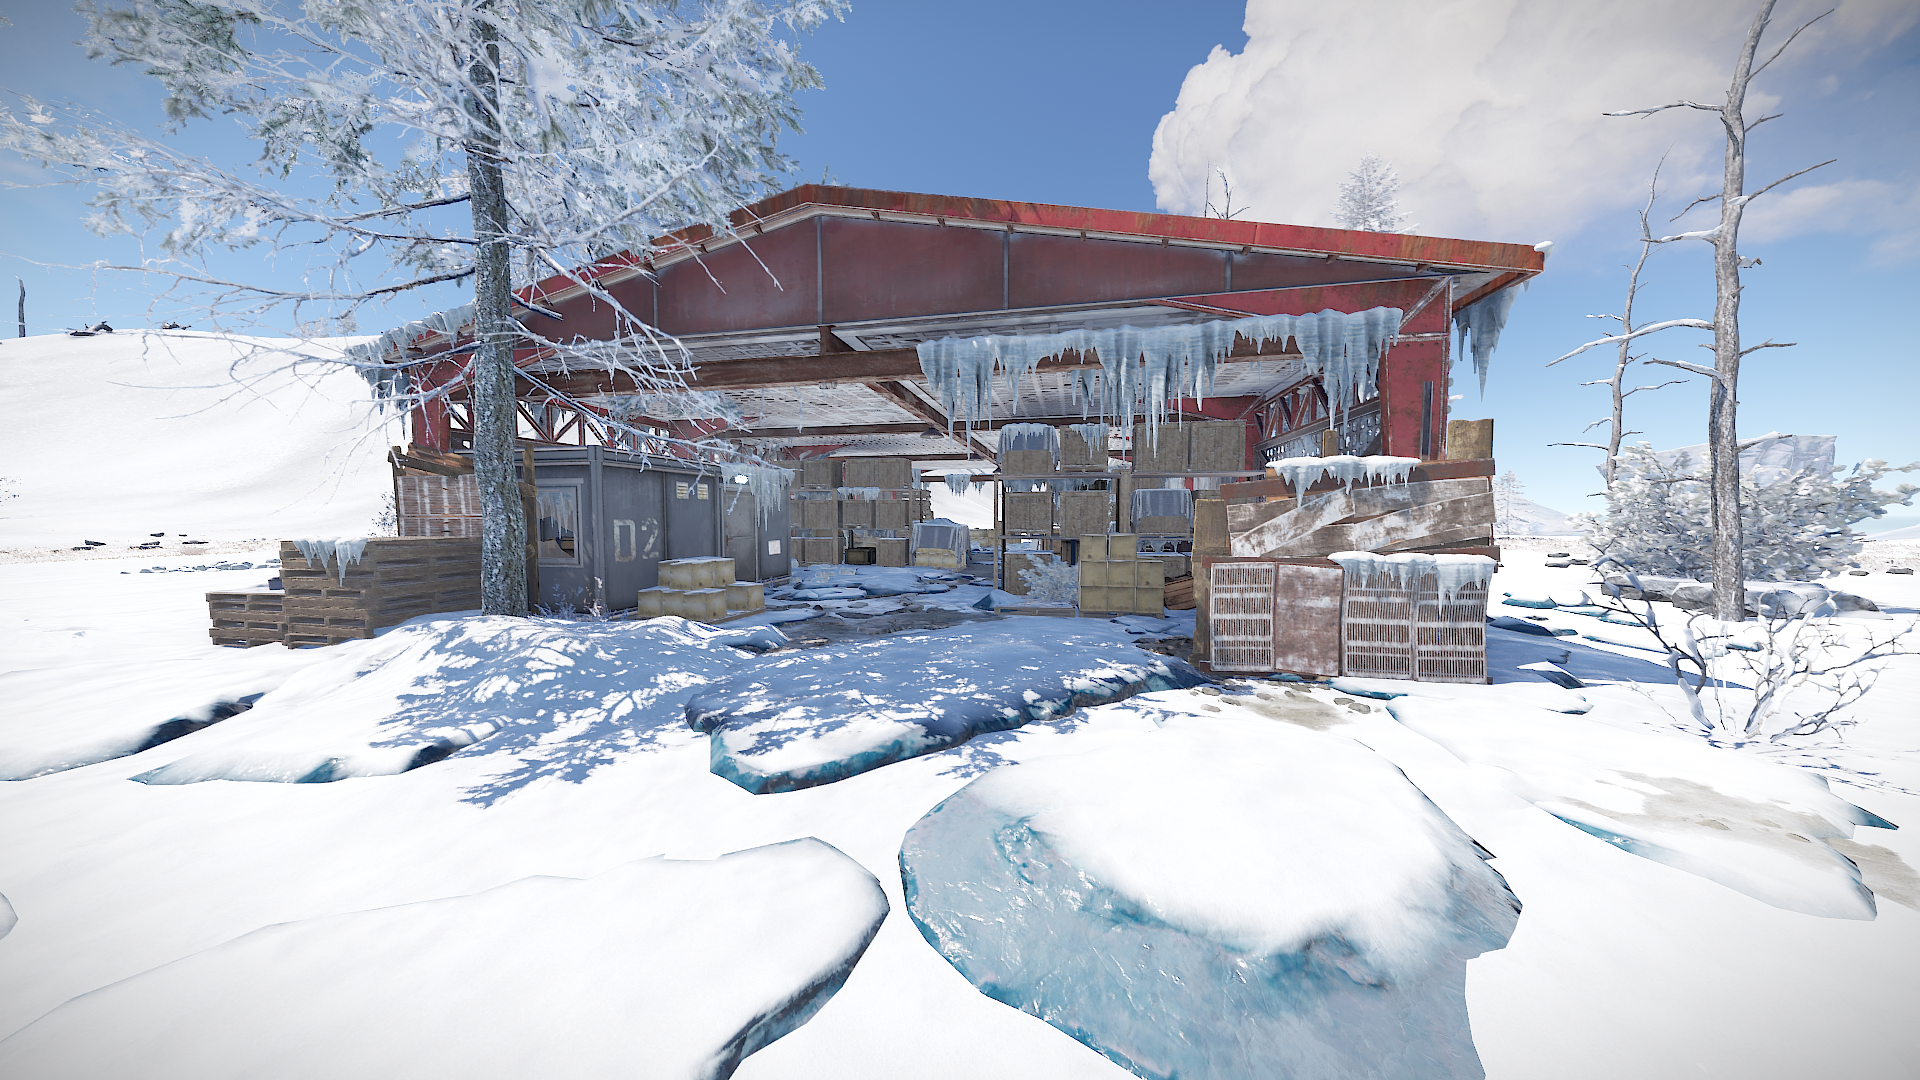 Snowy Mining Outpost